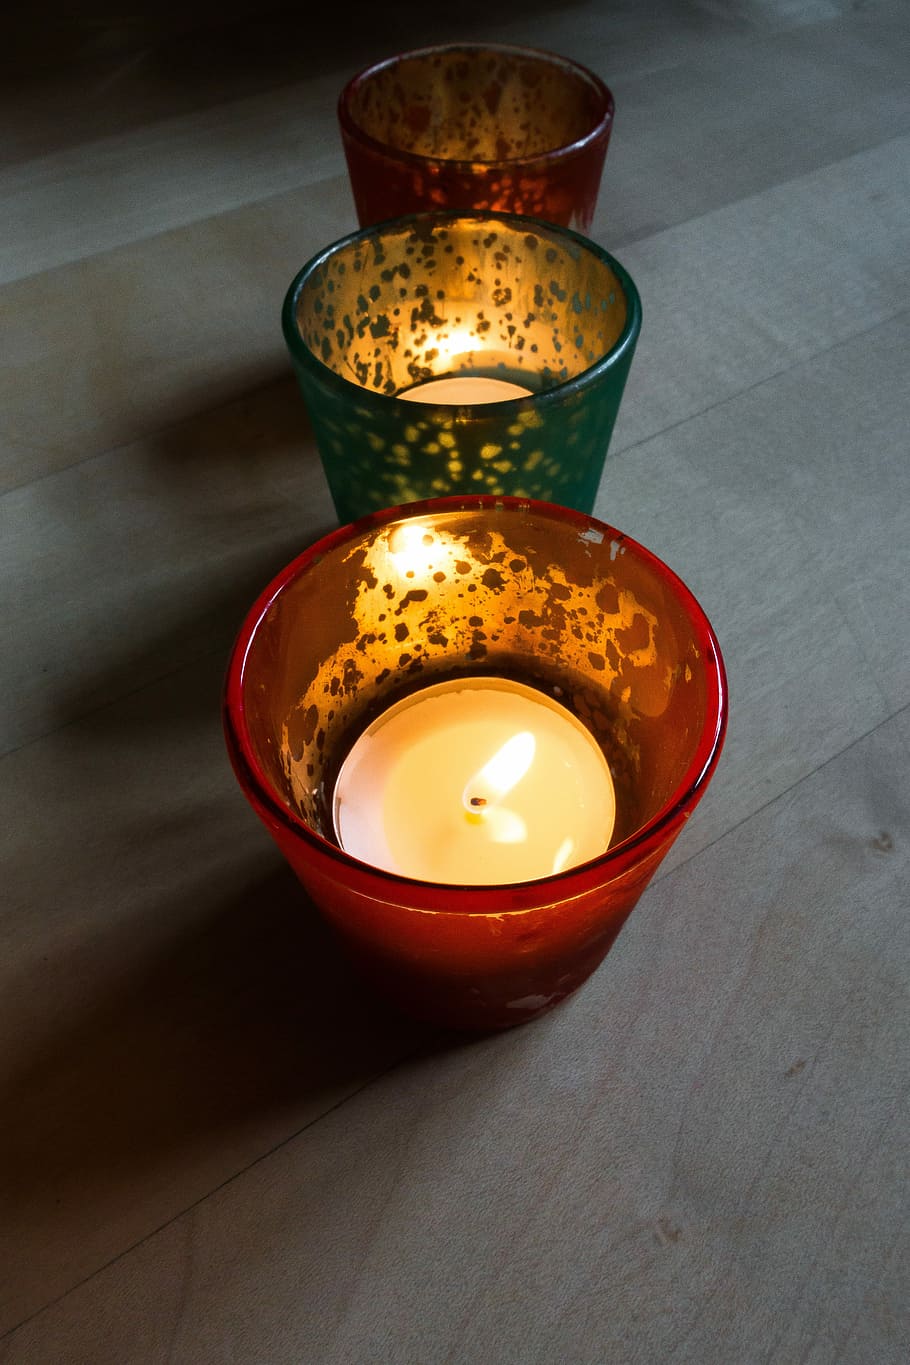 Candle, Tealight, Light, Christmas Time, flame, atmosphere, candlelight, burn, red, green